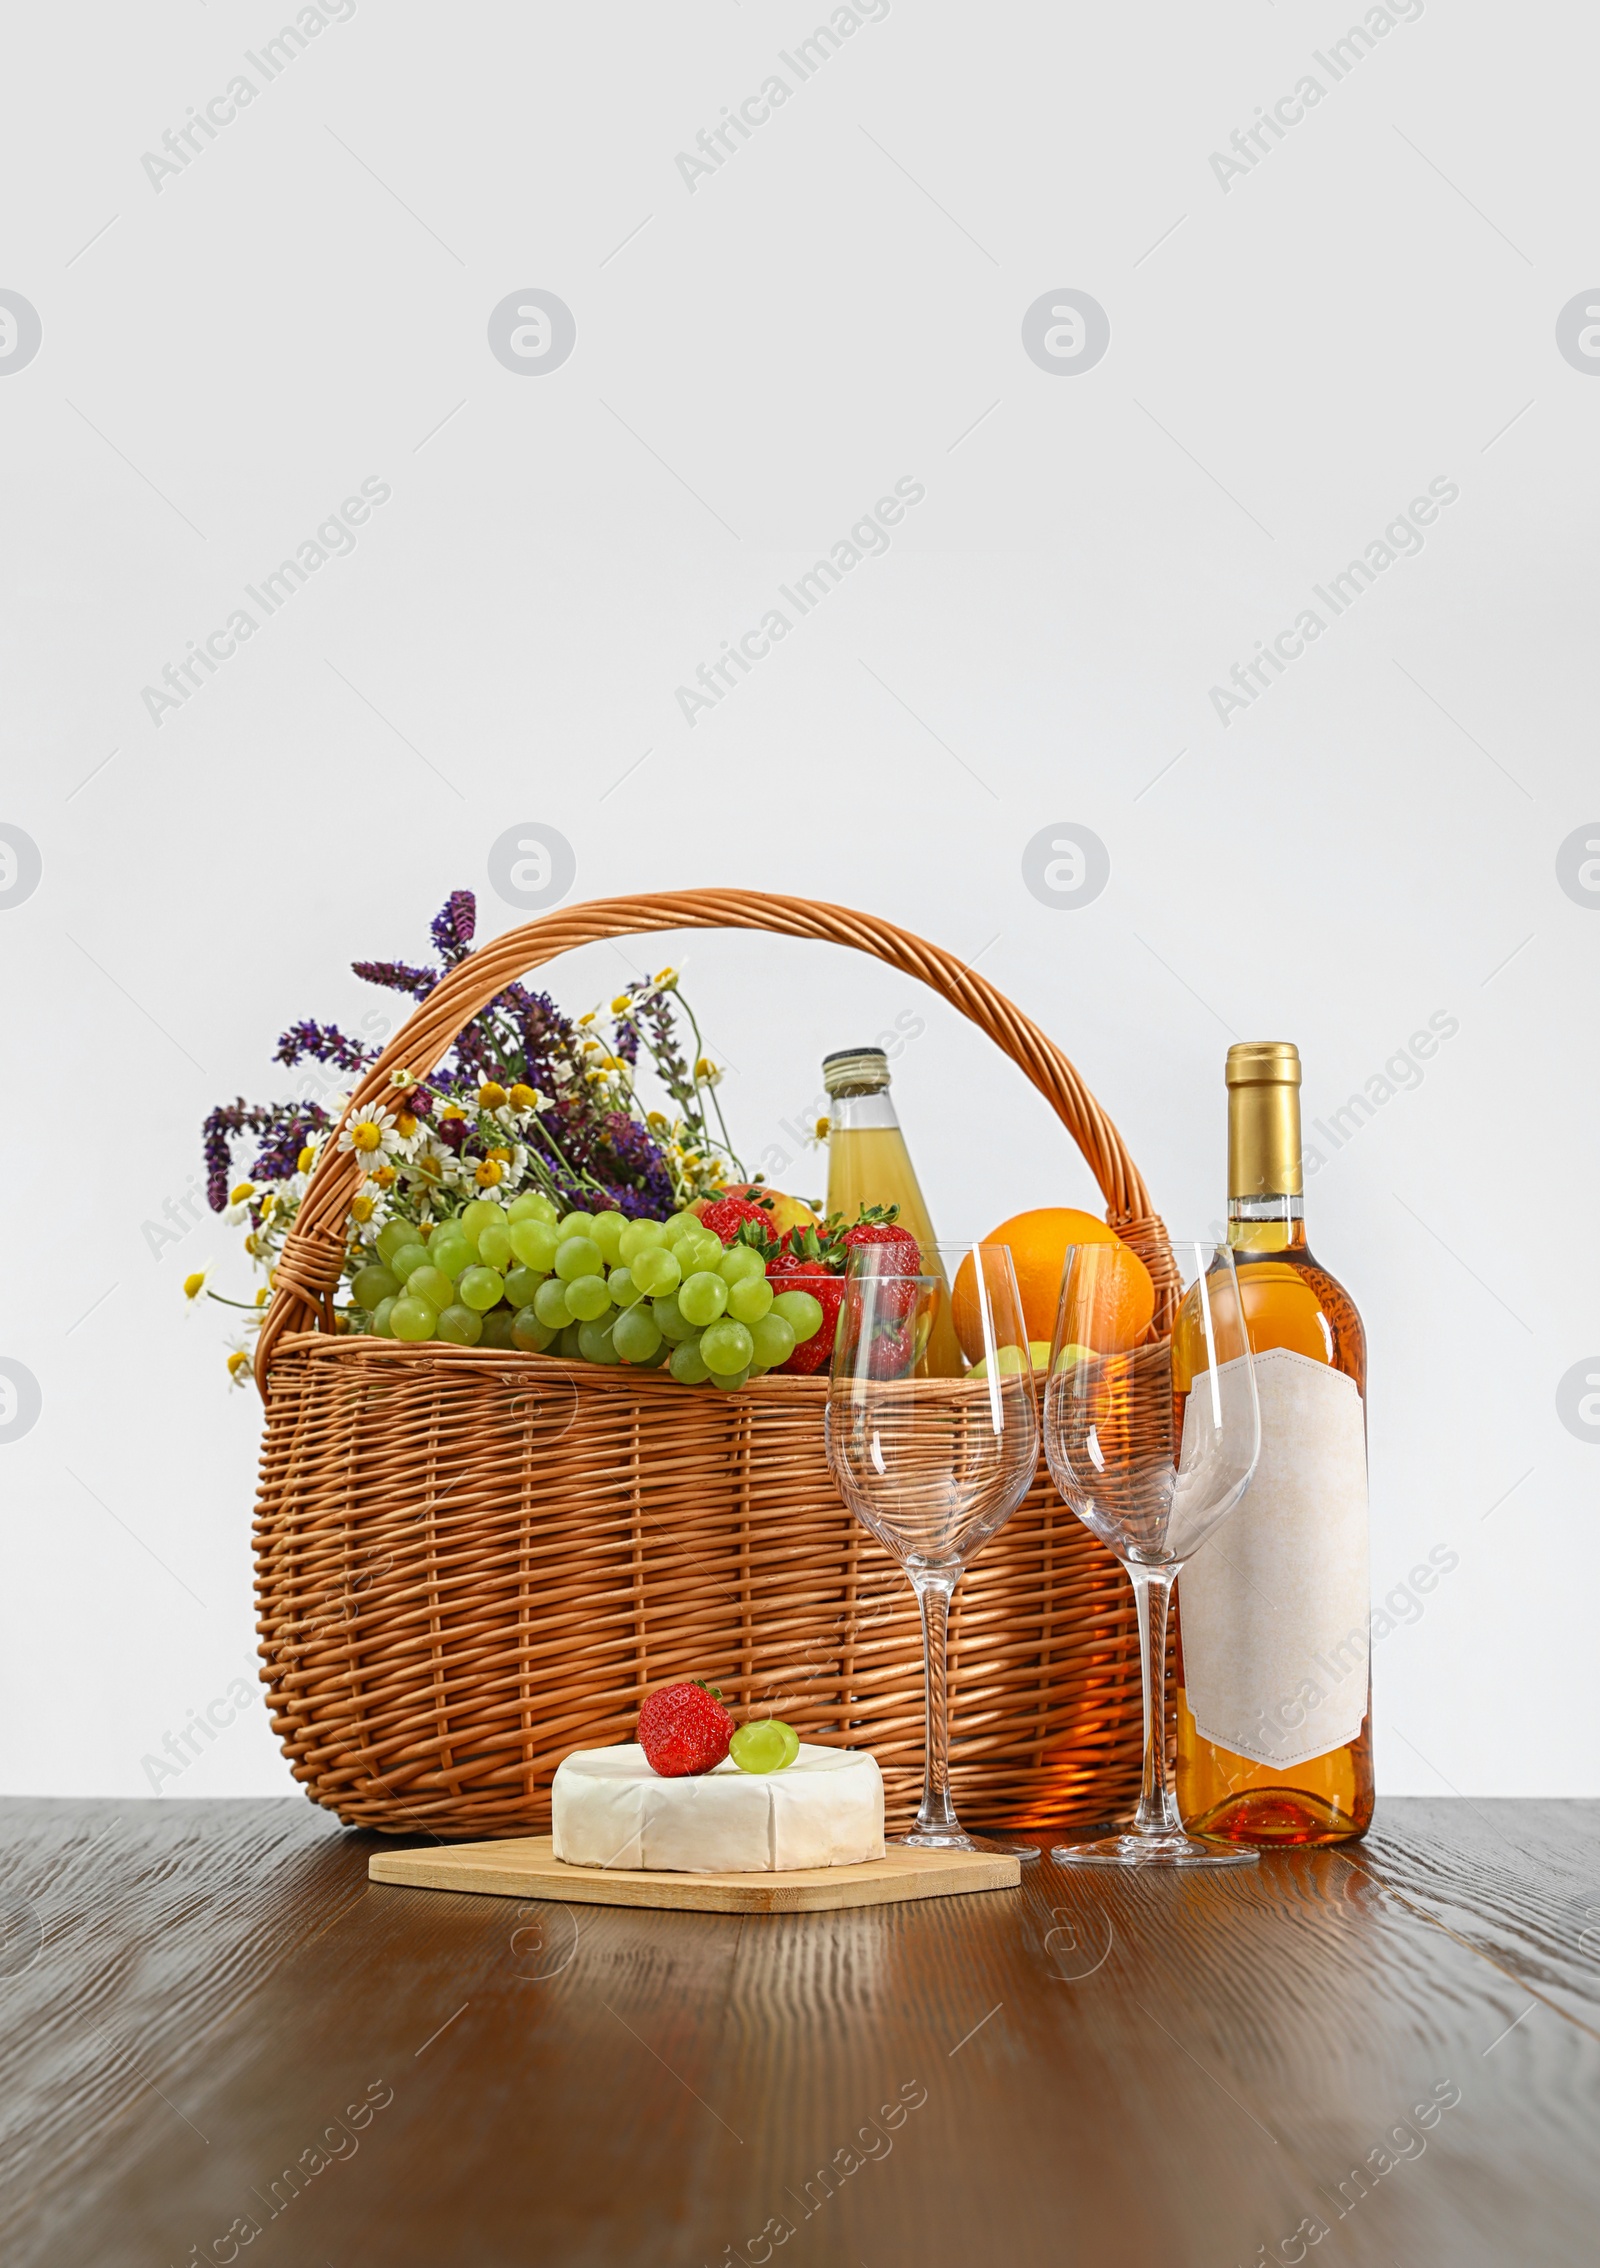 Photo of Picnic basket with wine and products on wooden table against white background